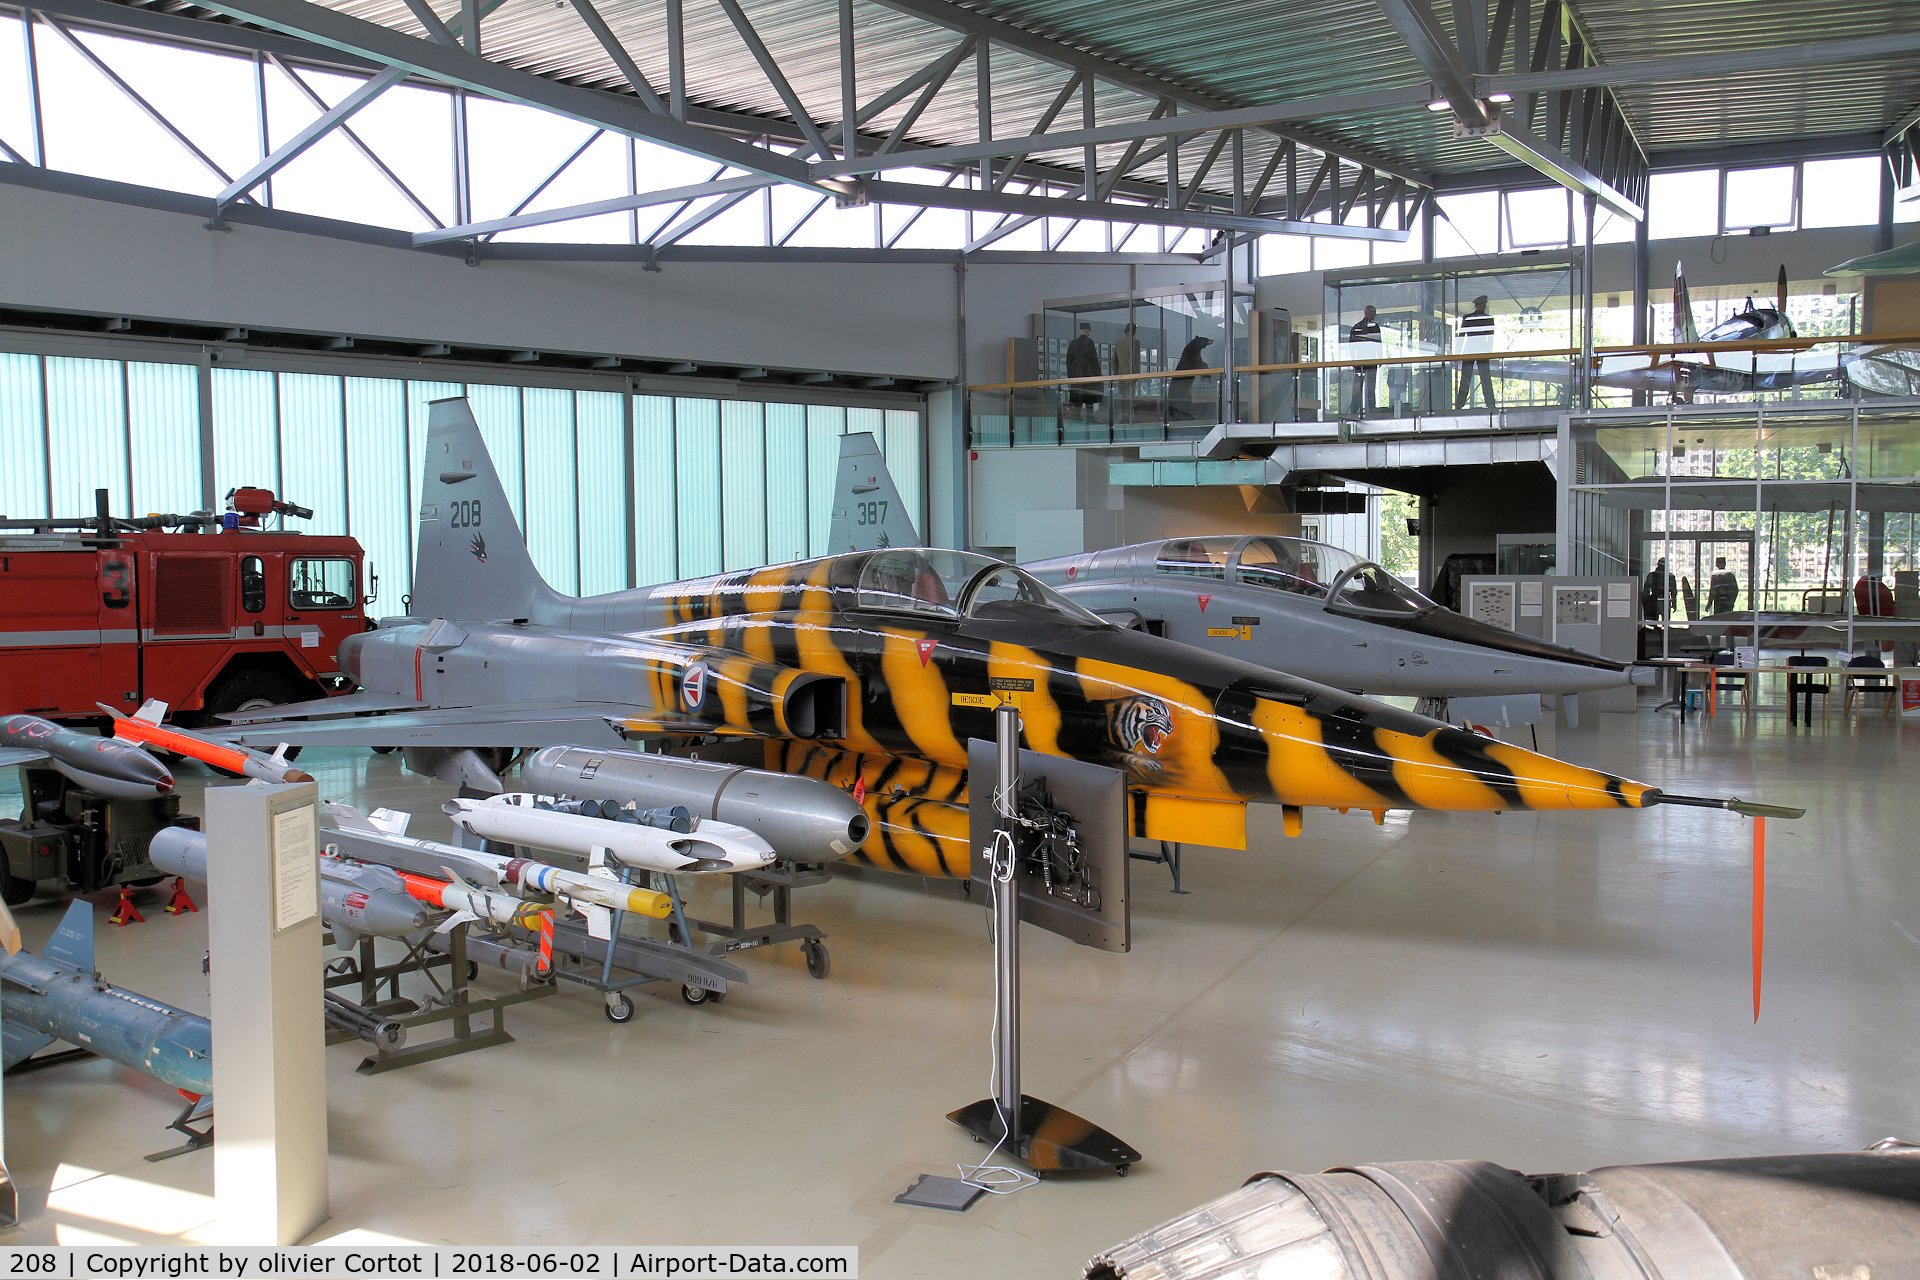 208, 1966 Northrop F-5A Freedom Fighter C/N N.7031, preserved in a museum next to Oslo airport